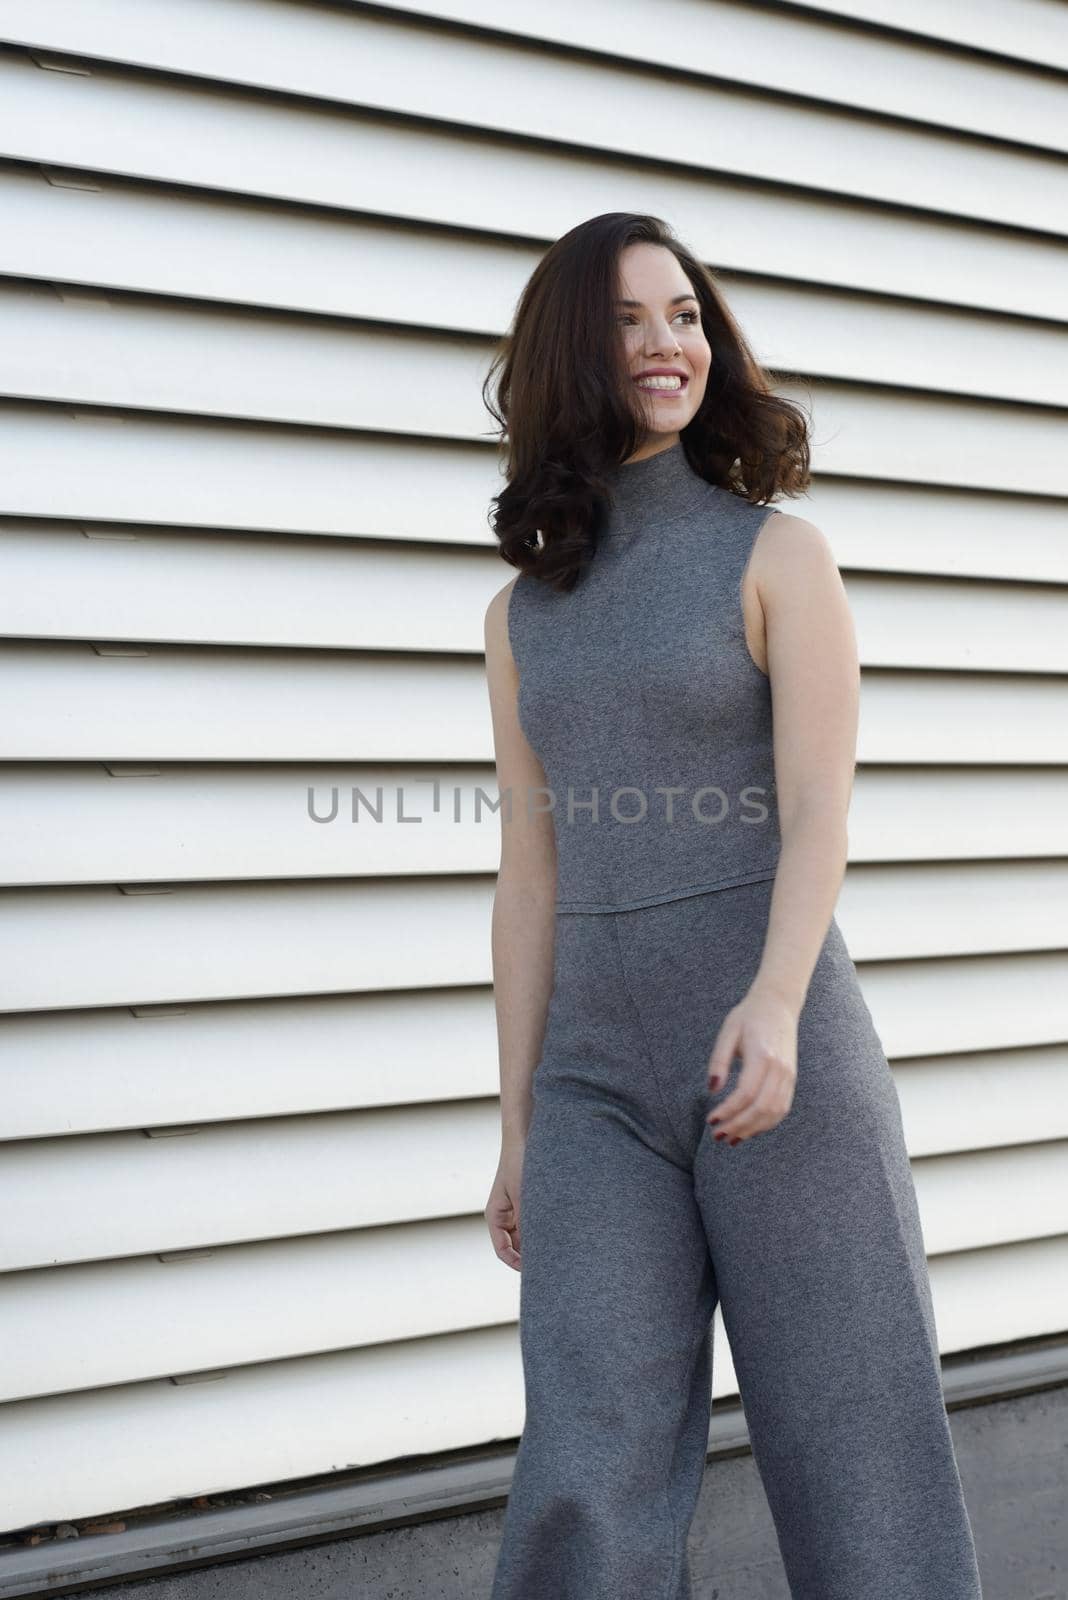 Young woman smiling in urban background by javiindy